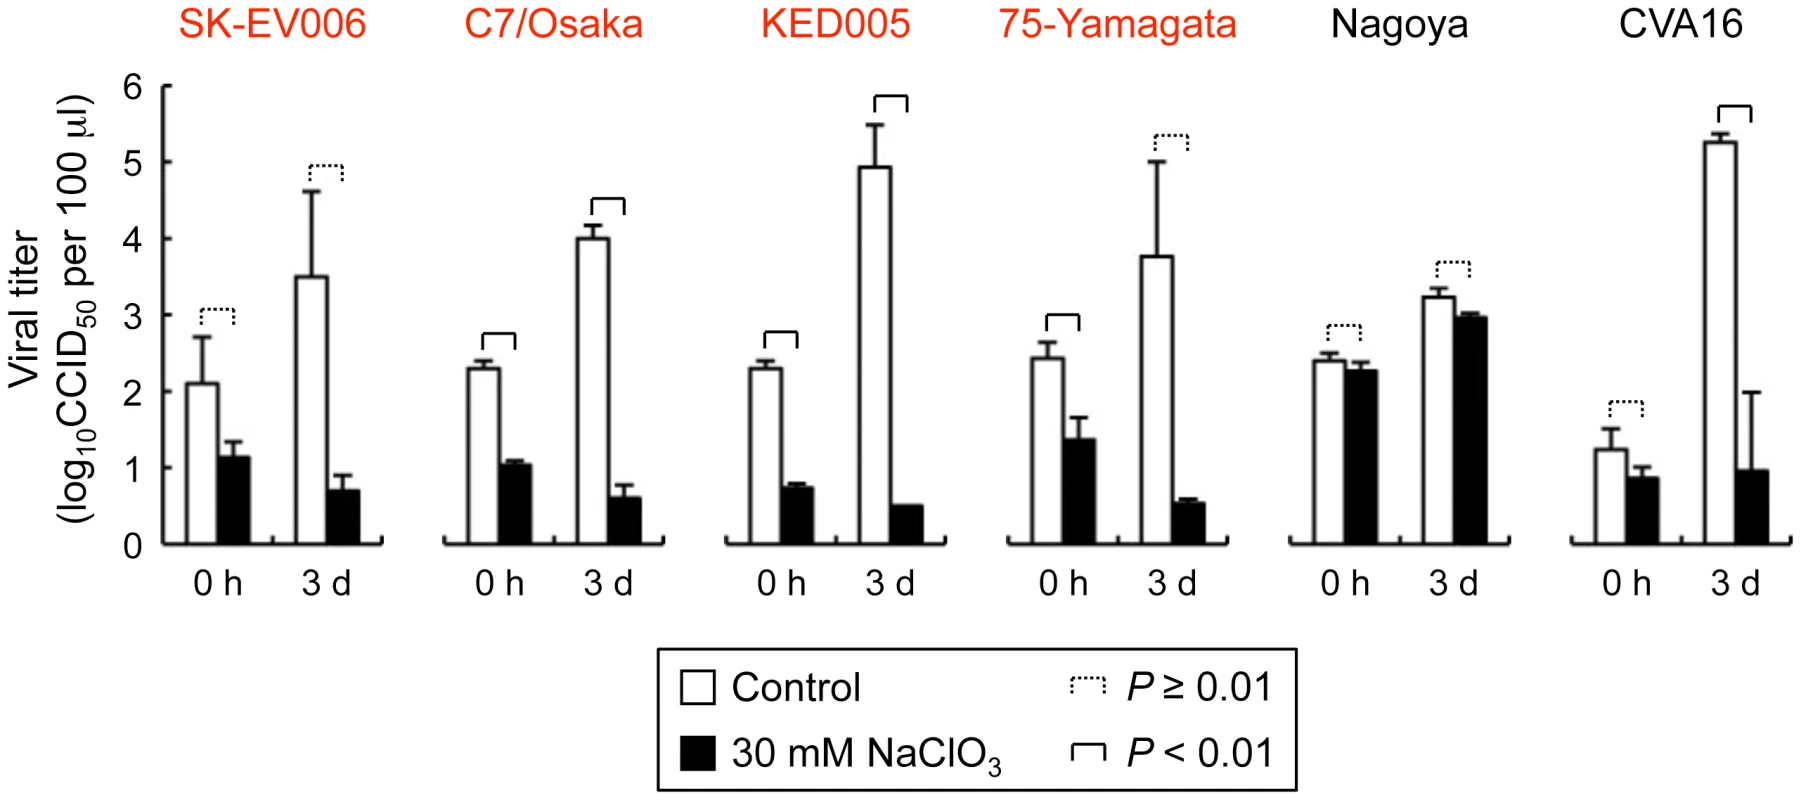 Replication of five EV71 strains and coxsackievirus A16 (CVA16) in Jurkat T cells in the presence of sodium chlorate.